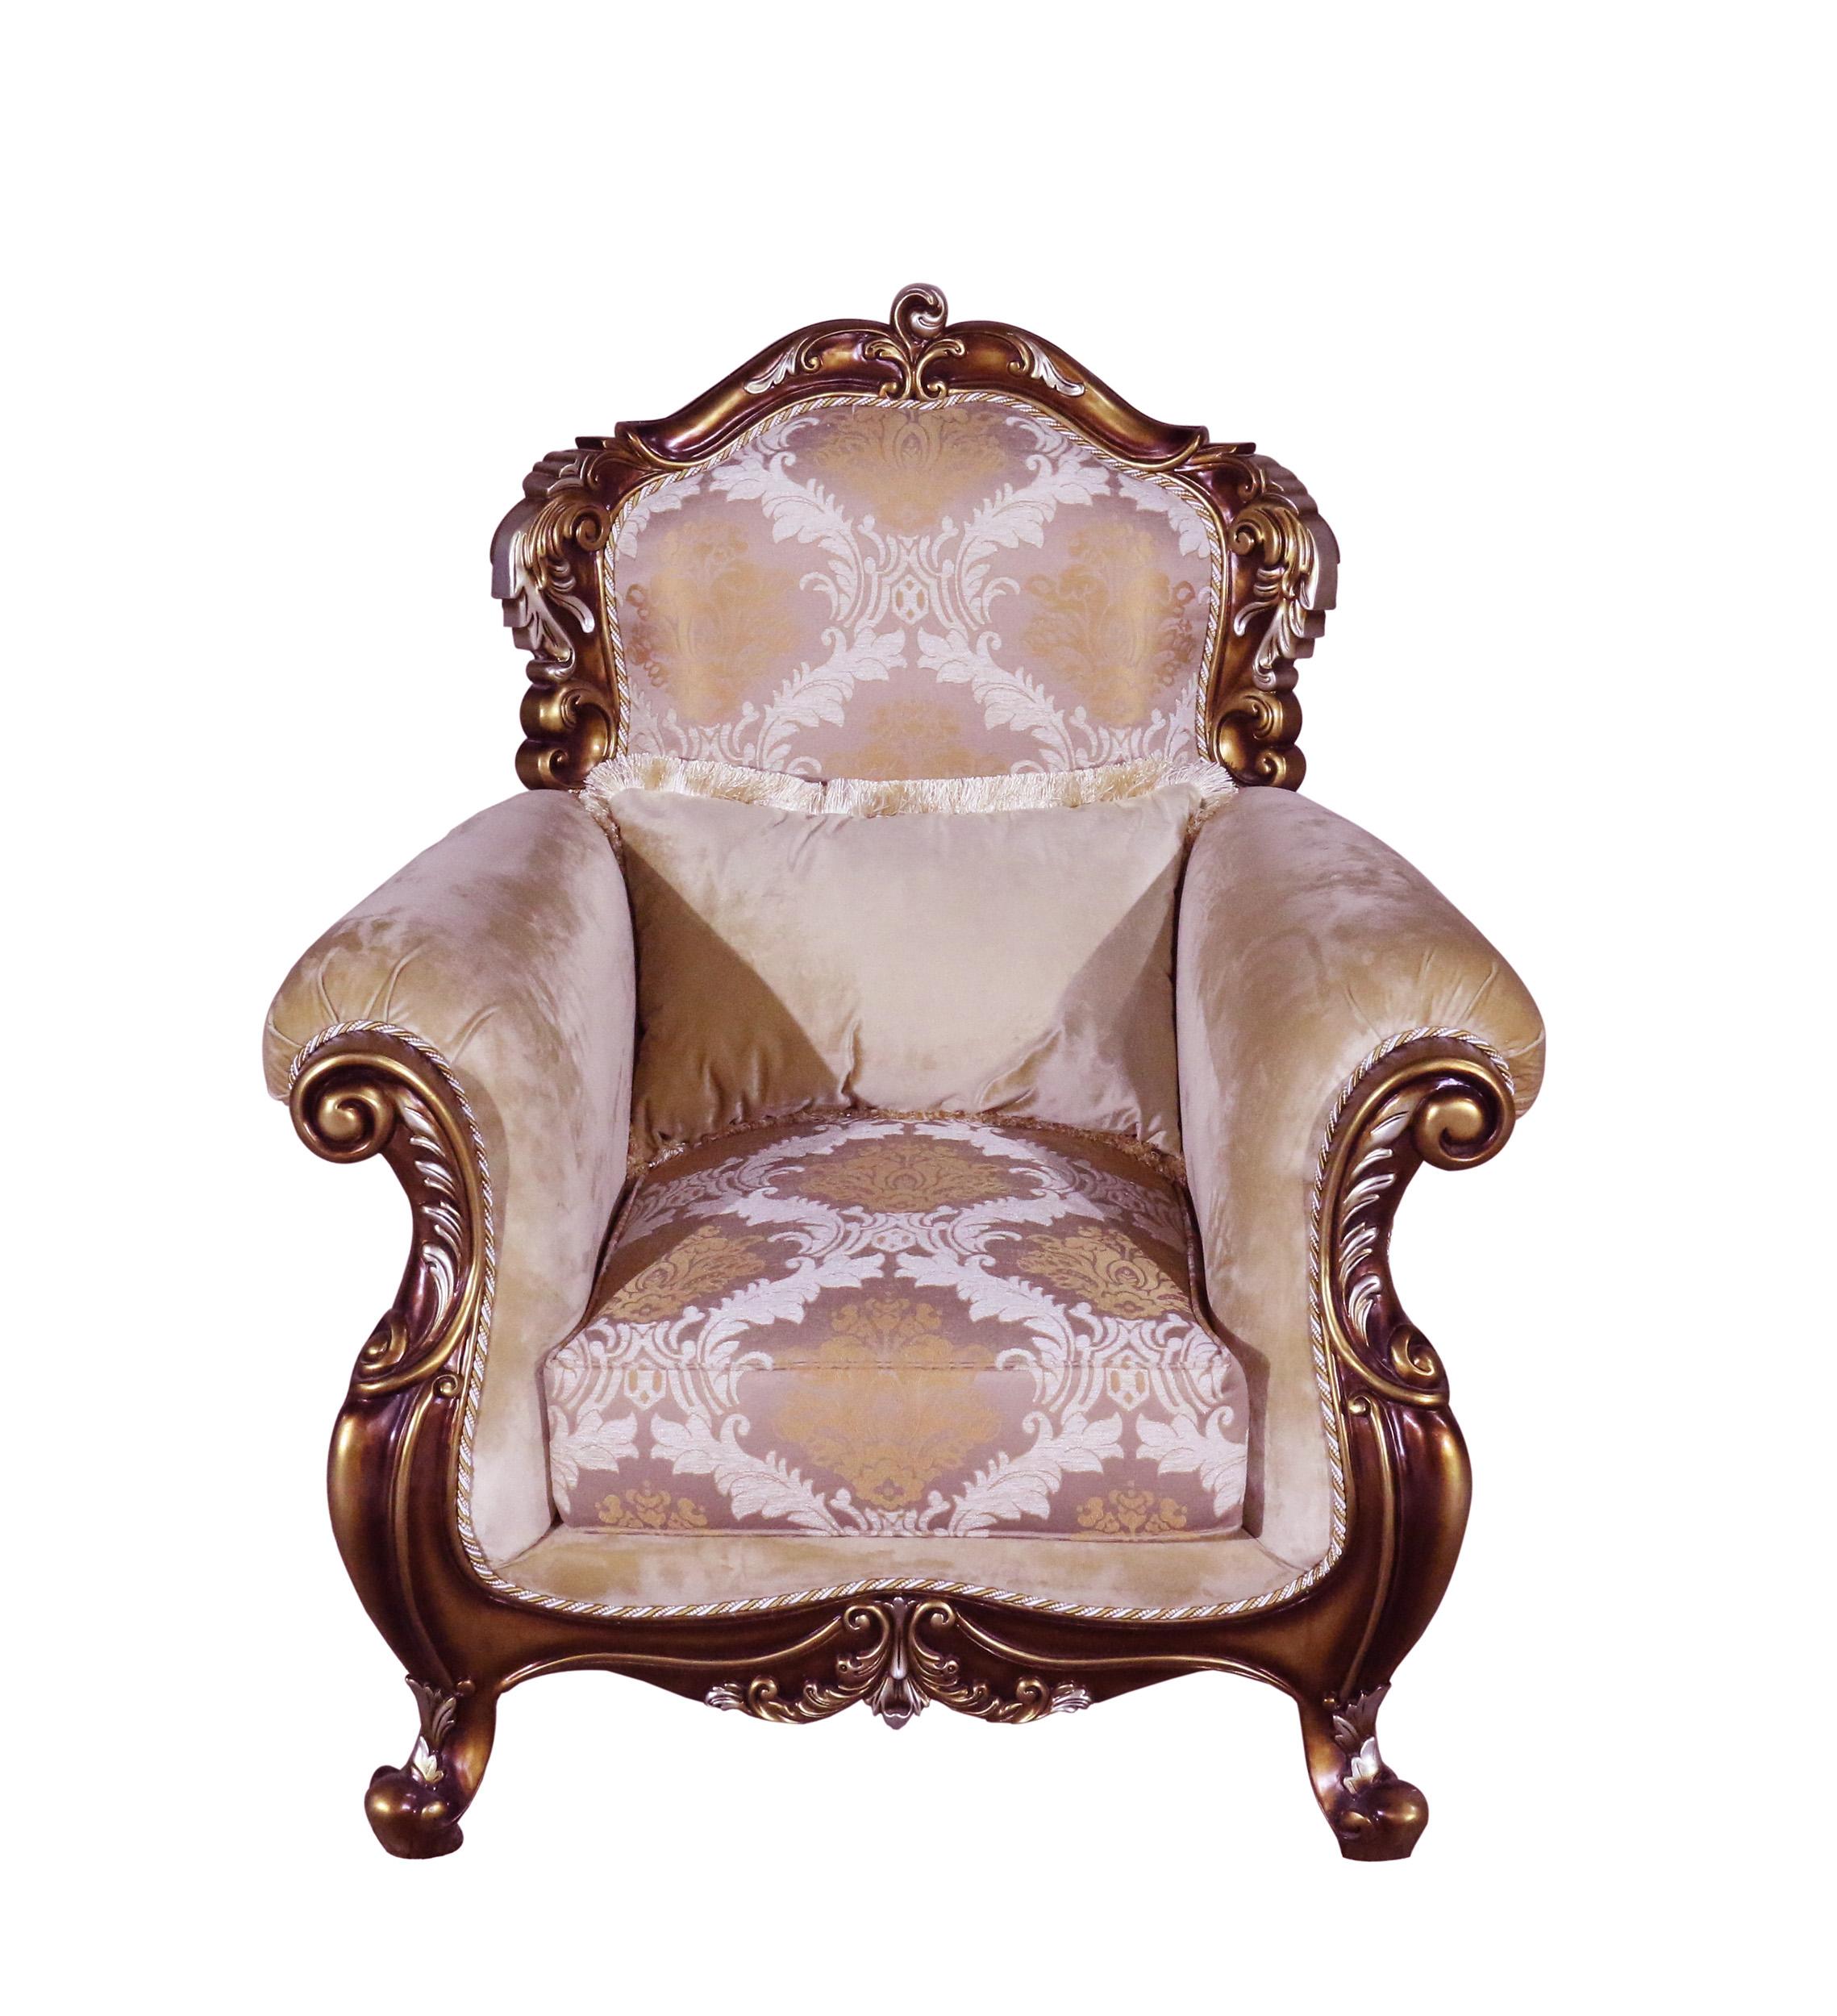 Classic, Traditional Arm Chair TIZIANO 38994-C in Antique, Silver, Gold, Brown Fabric